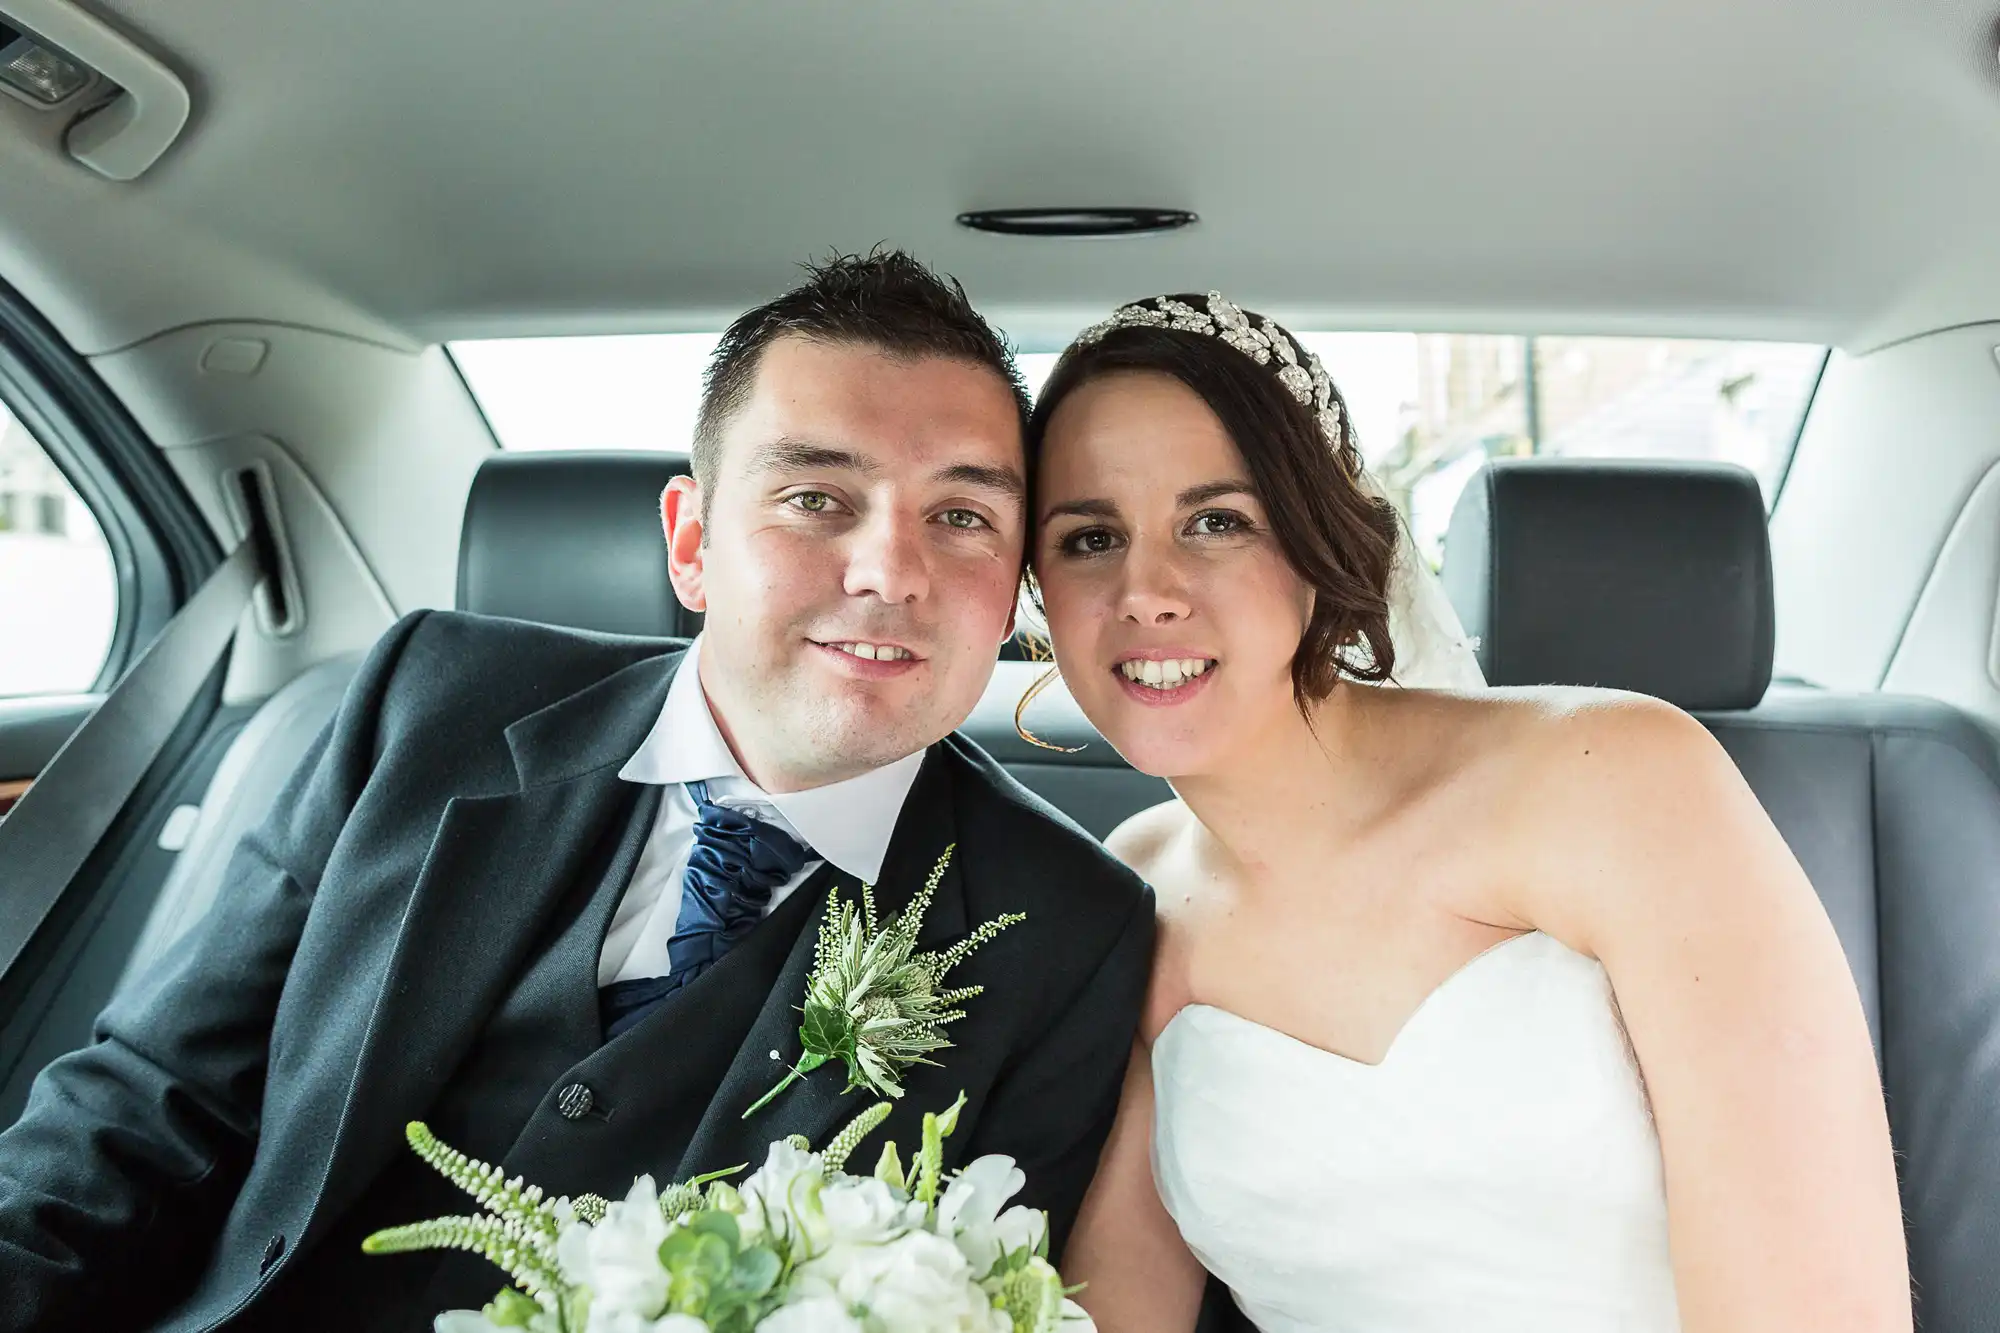 A newlywed couple, a man and a woman, smiling inside a car. the man wears a black suit and the woman a white wedding dress.